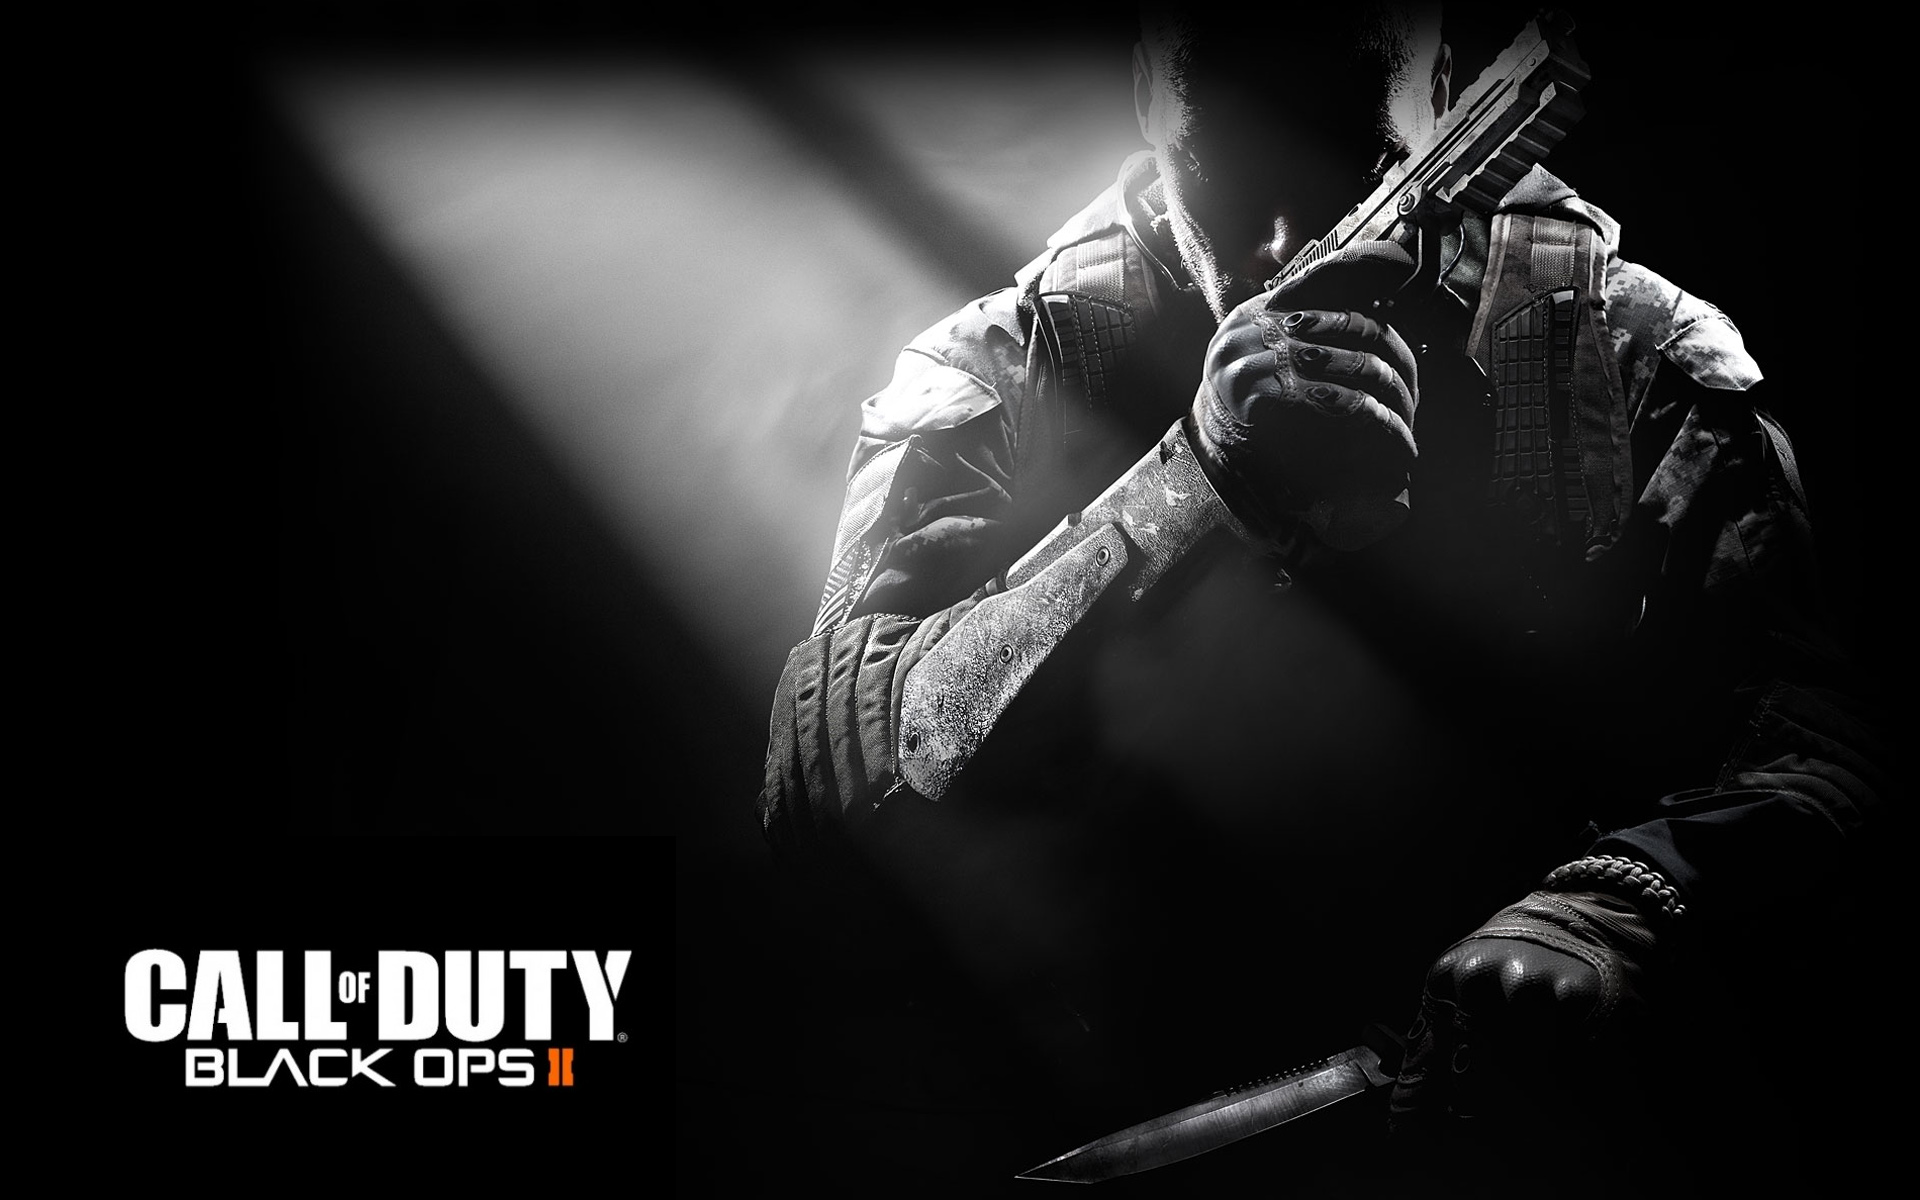 Call of Duty: Black Ops II will have a new Perks System